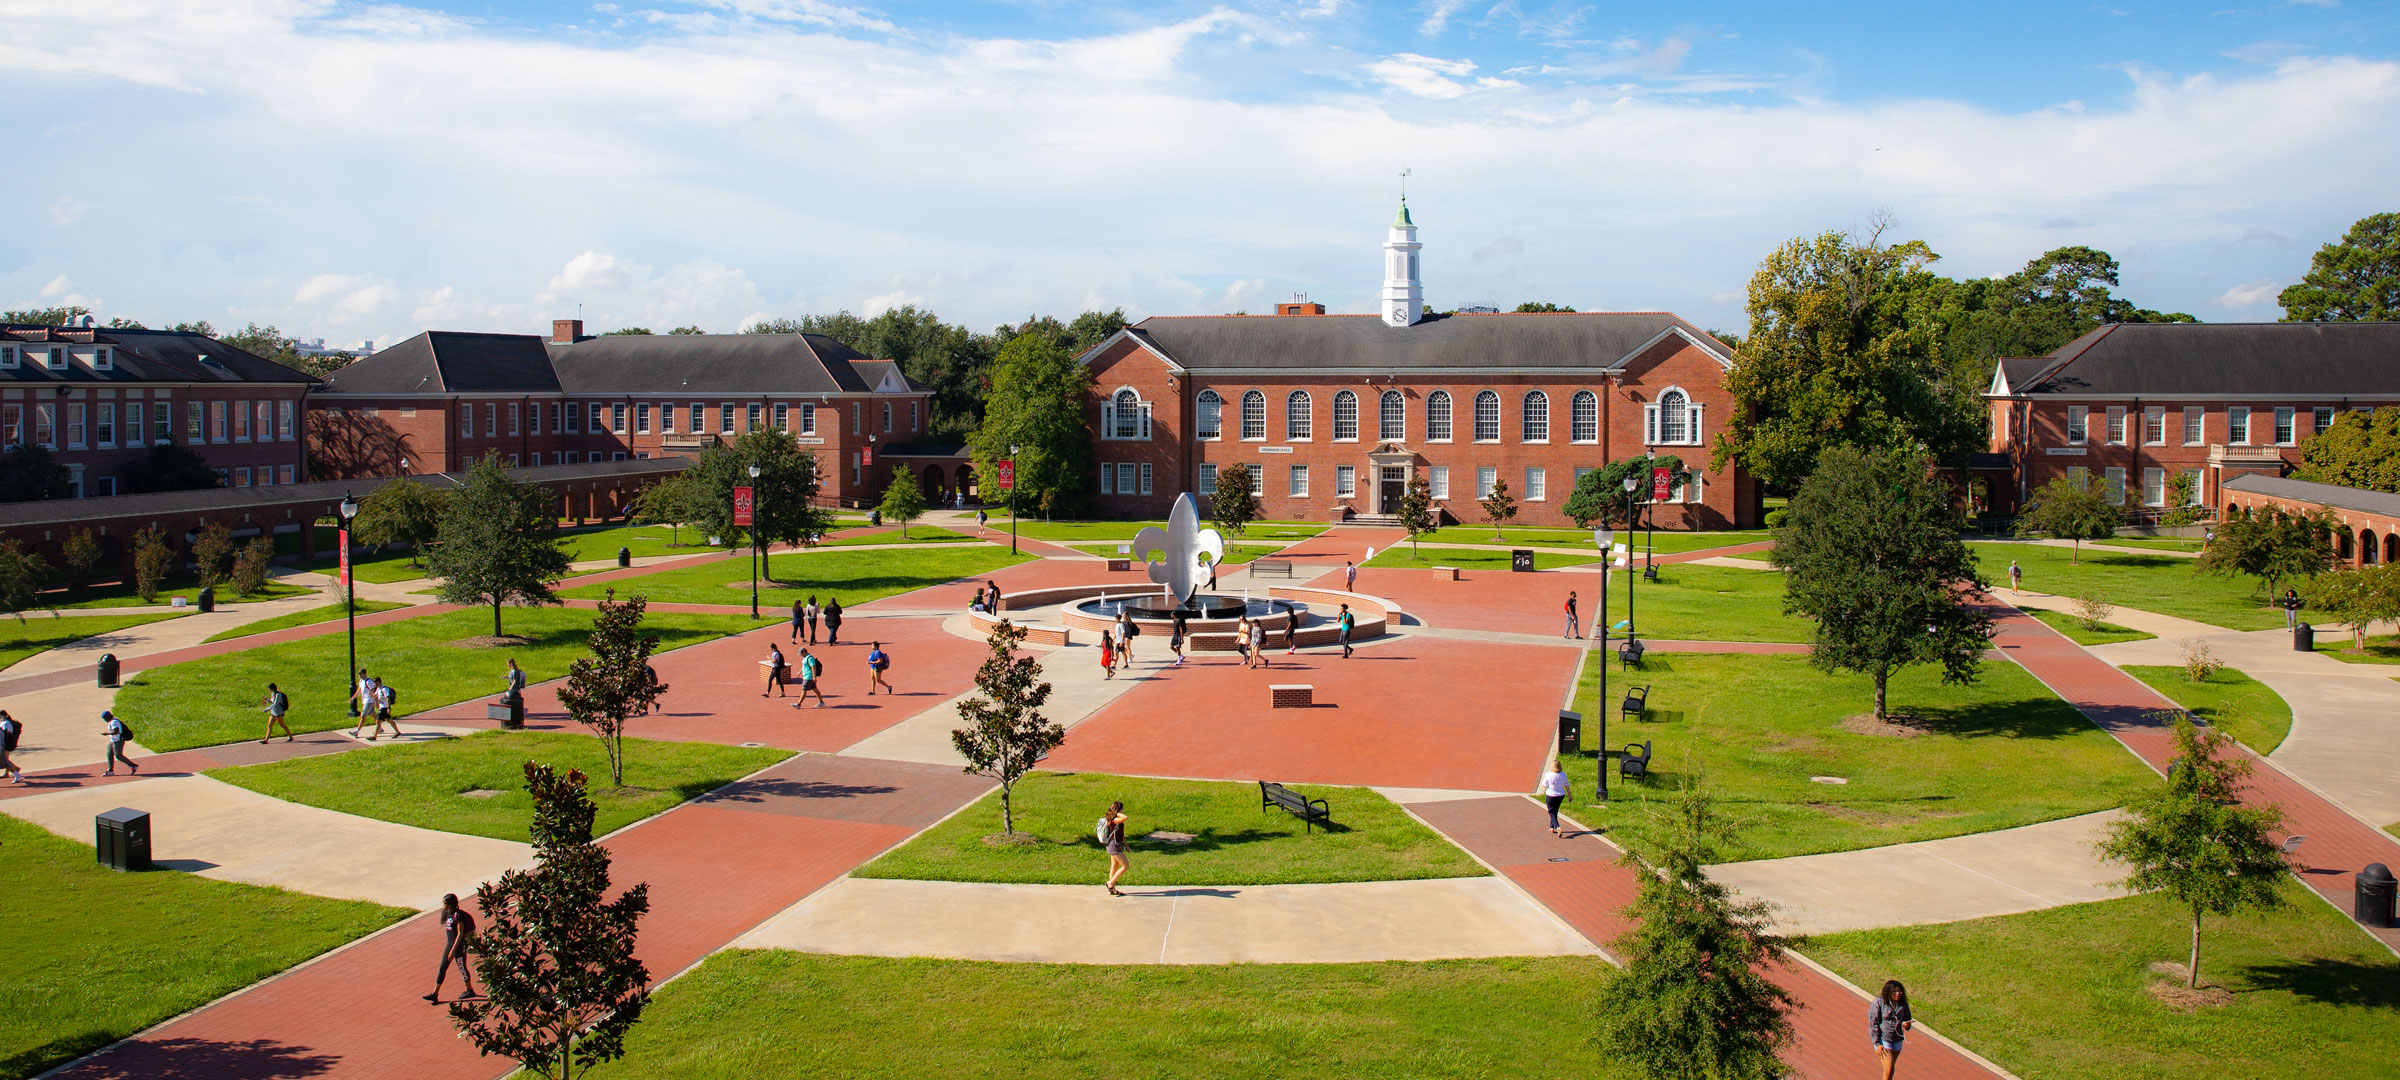 Aerial view of the University of Louisiana at 69传媒 Quad with the fleur de lis statue and sidewalks